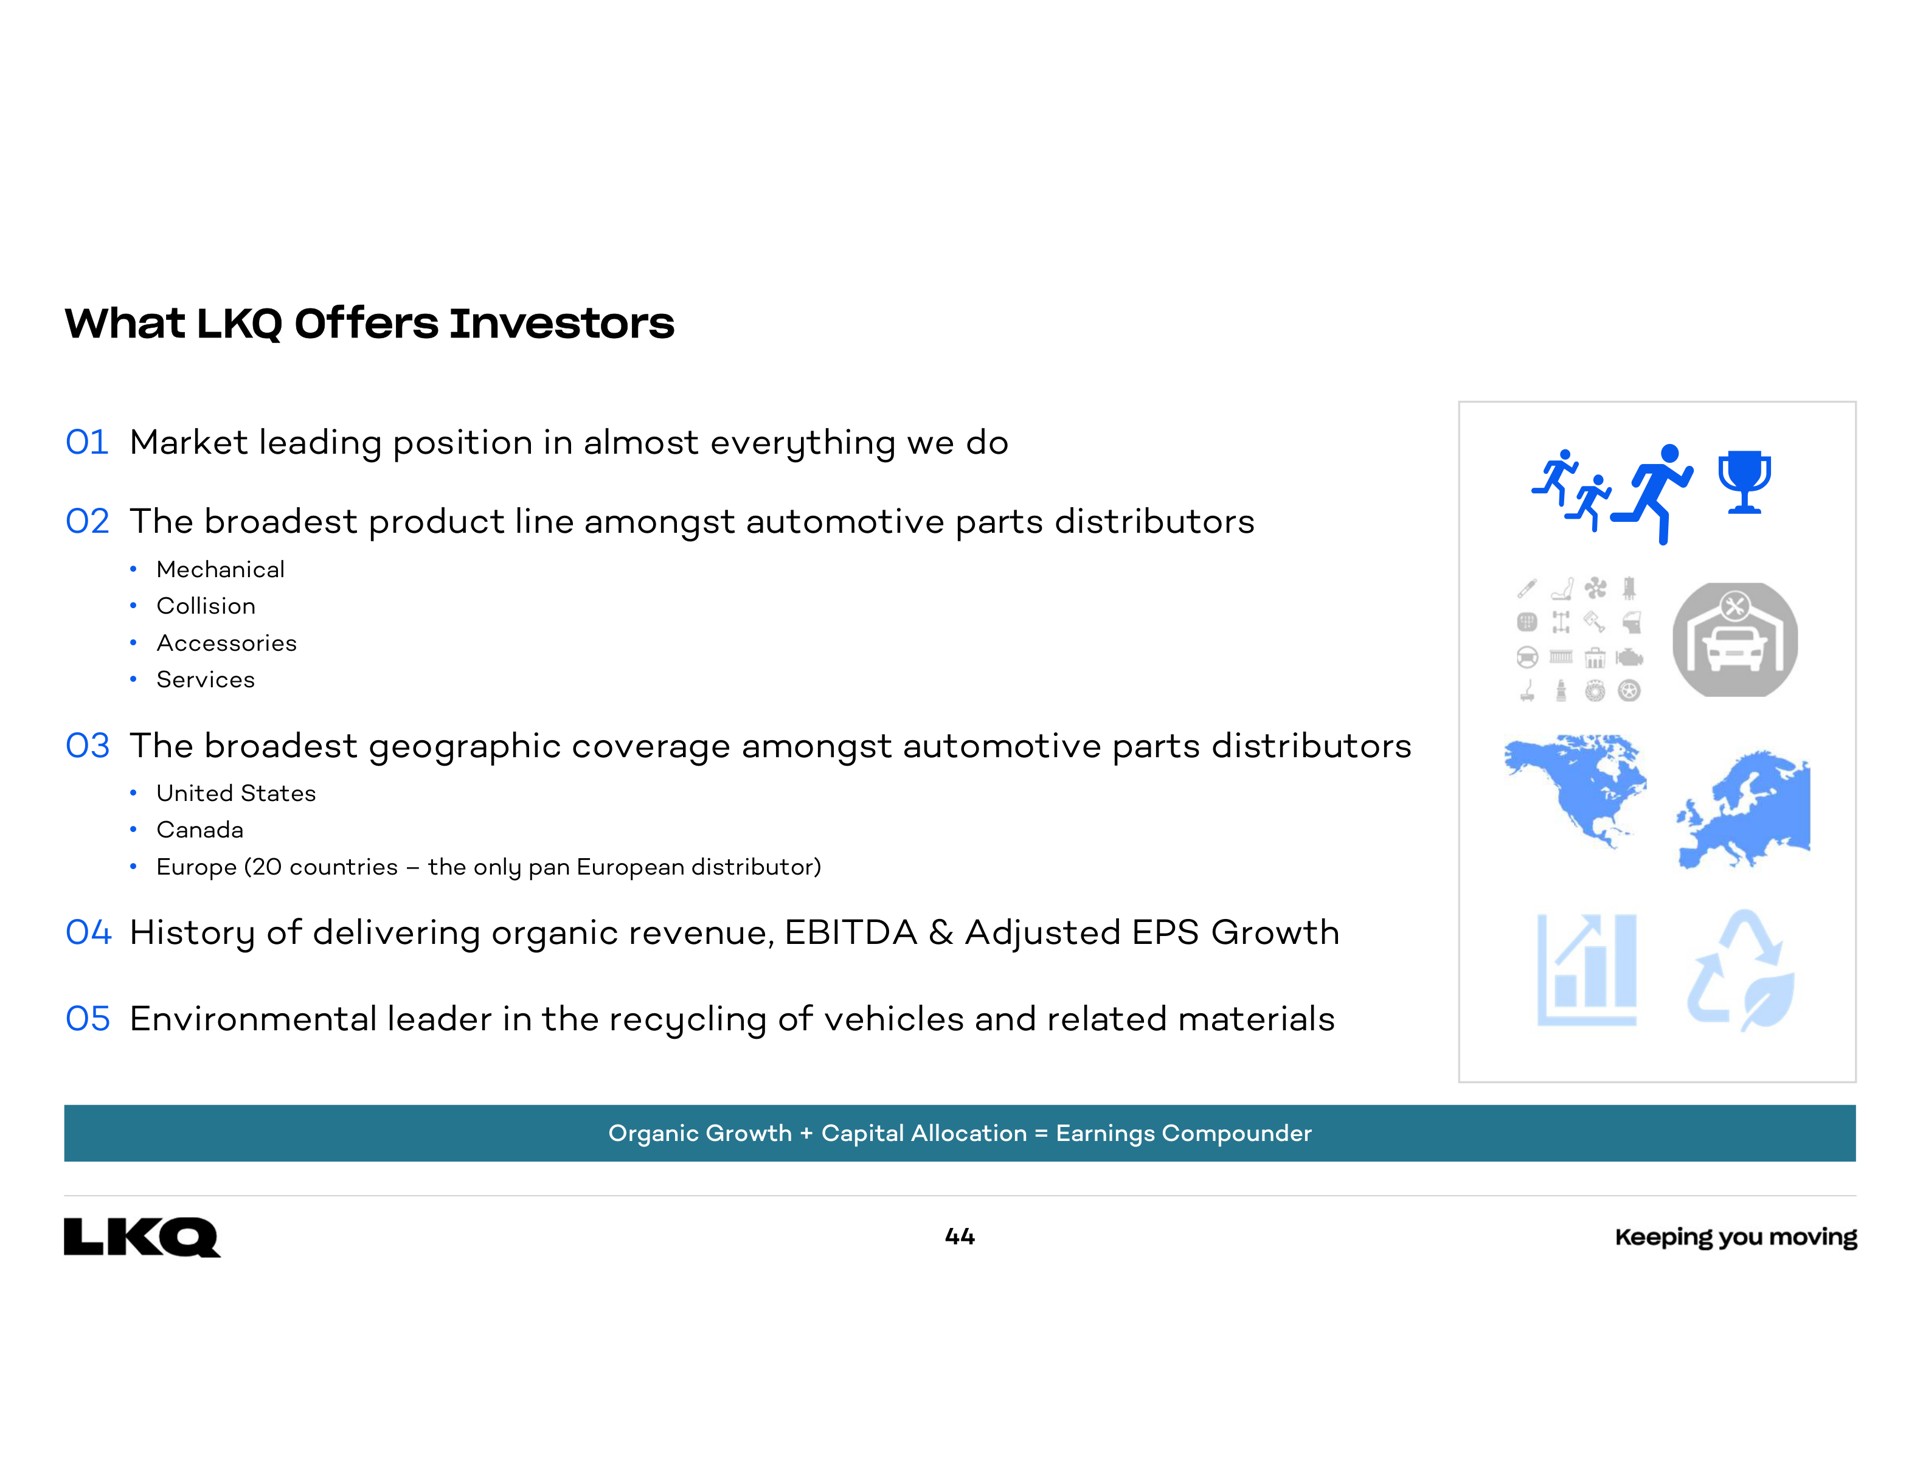 what offers investors market leading position in almost everything we do the product line amongst automotive parts distributors the geographic coverage amongst automotive parts distributors history of delivering organic revenue adjusted growth environmental leader in the recycling of vehicles and related materials at | LKQ